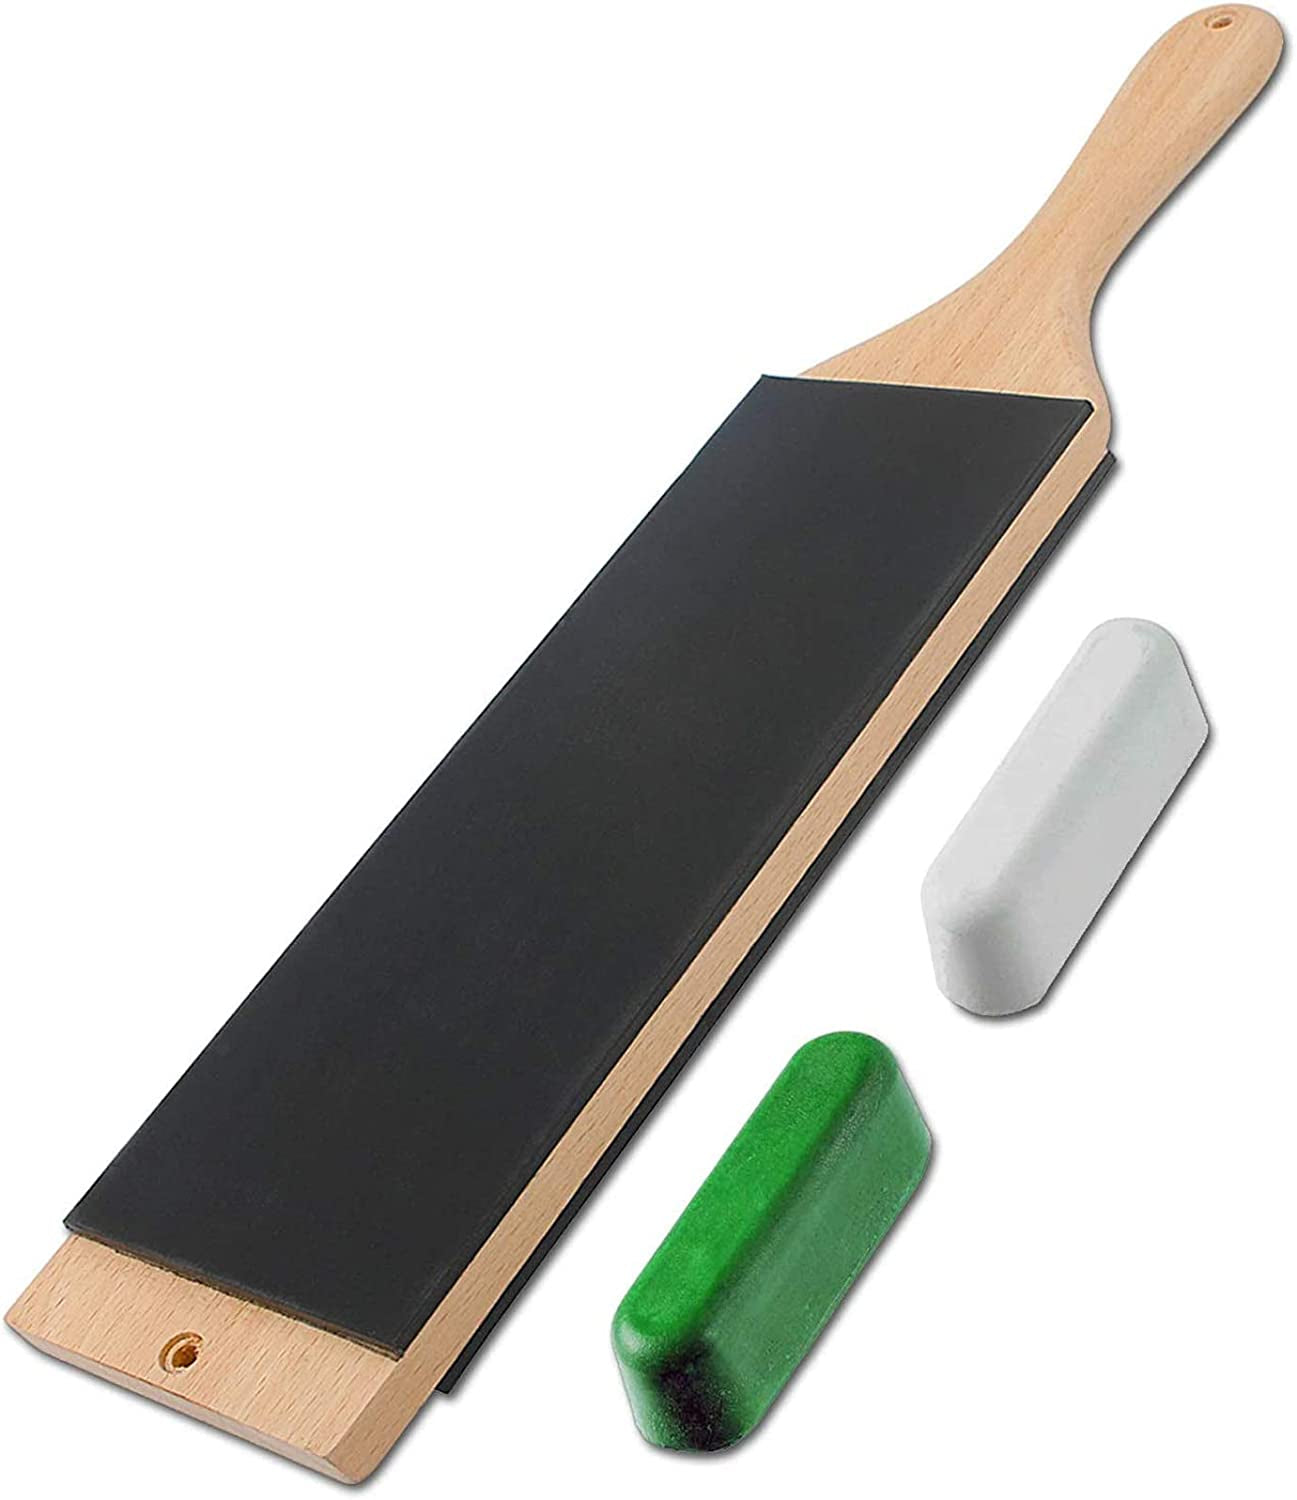 LAVODA, Leather Paddle Strop Large 2 Sided 3 Inch by 9 Inch with 2.8Oz. Green White Compound (PADDLE STROP)